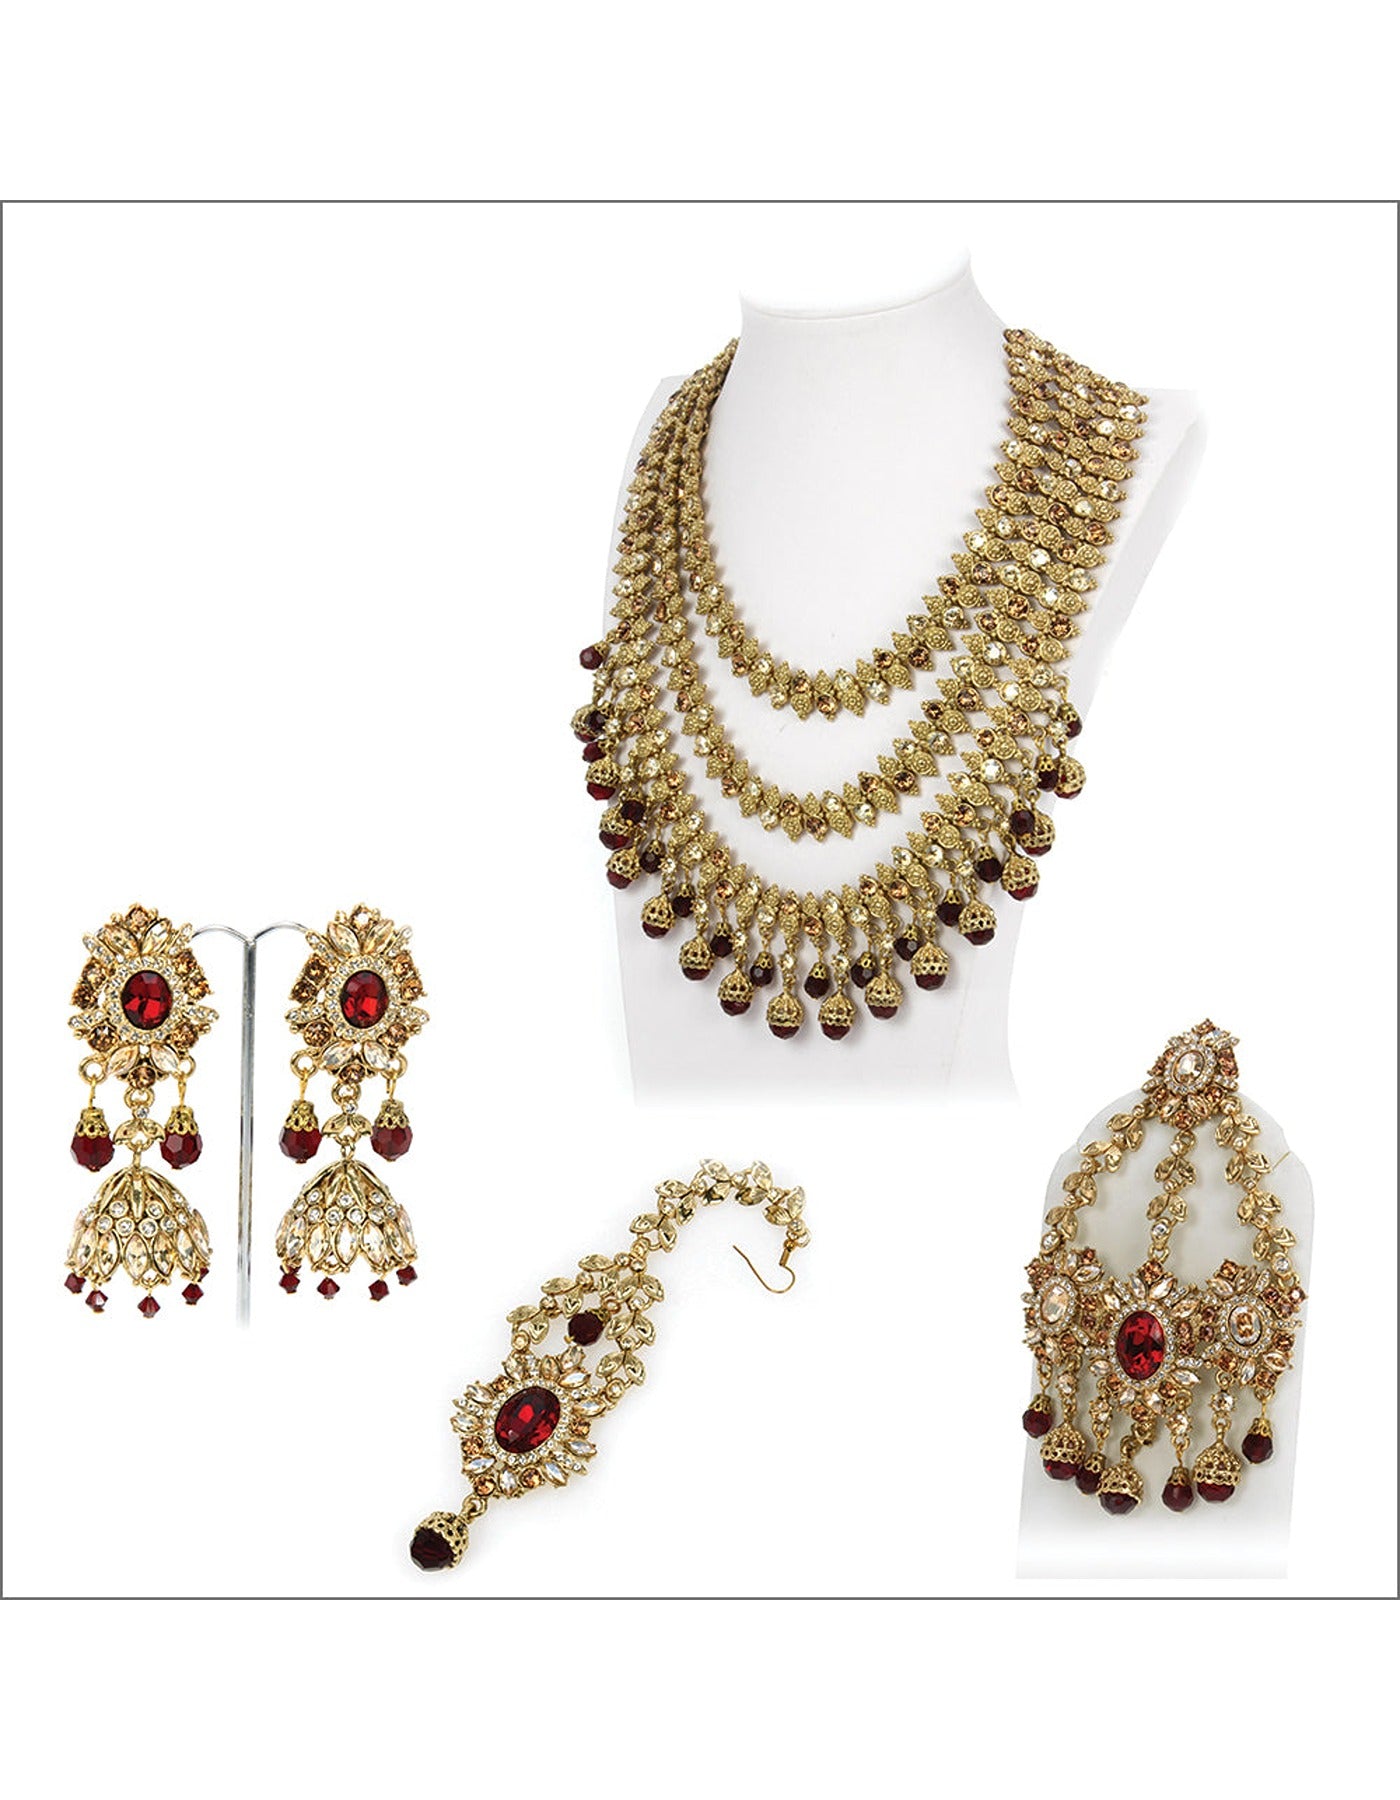 Antique Gold Jewelry with Siam Red Crystal Accents